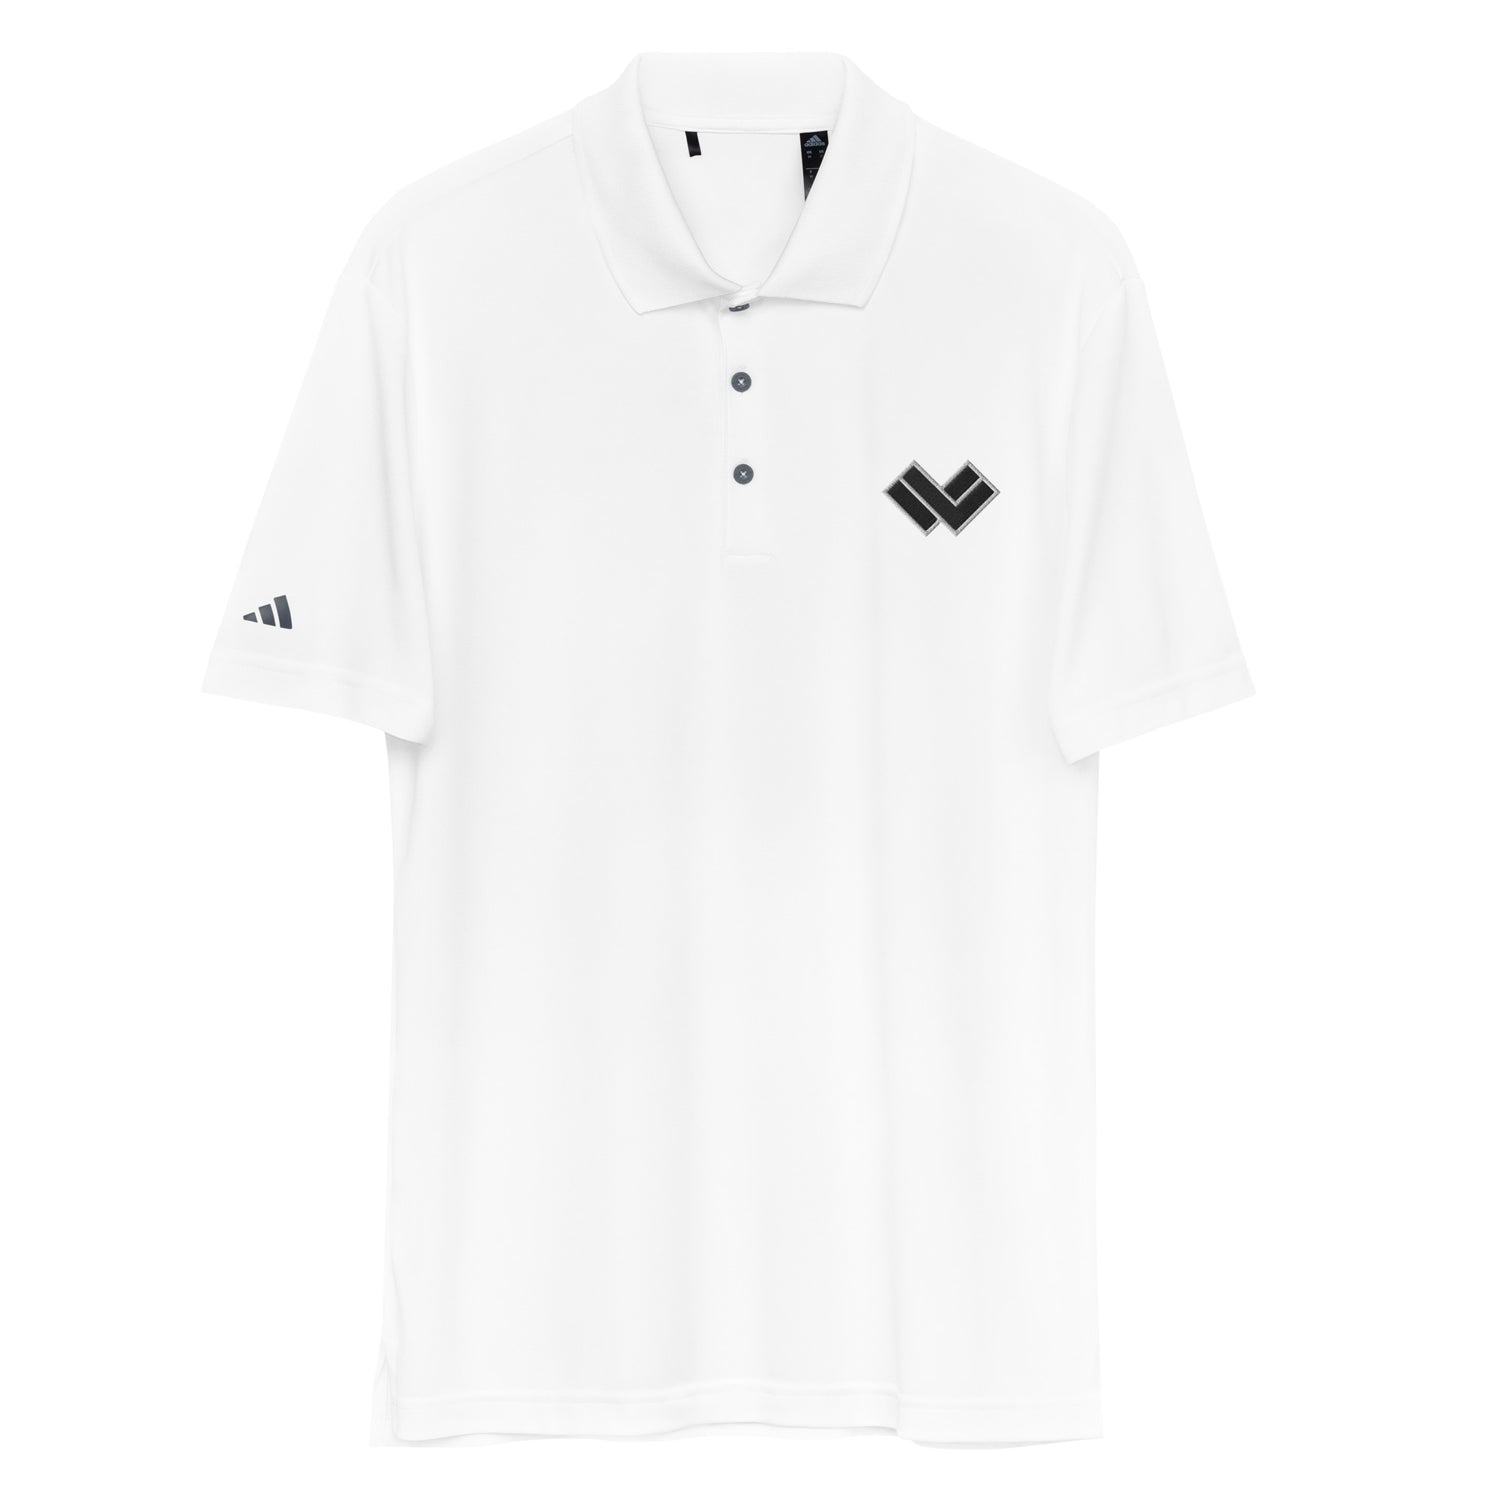 Adidas Performance Lacrosse Polo Shirte - Front with logo